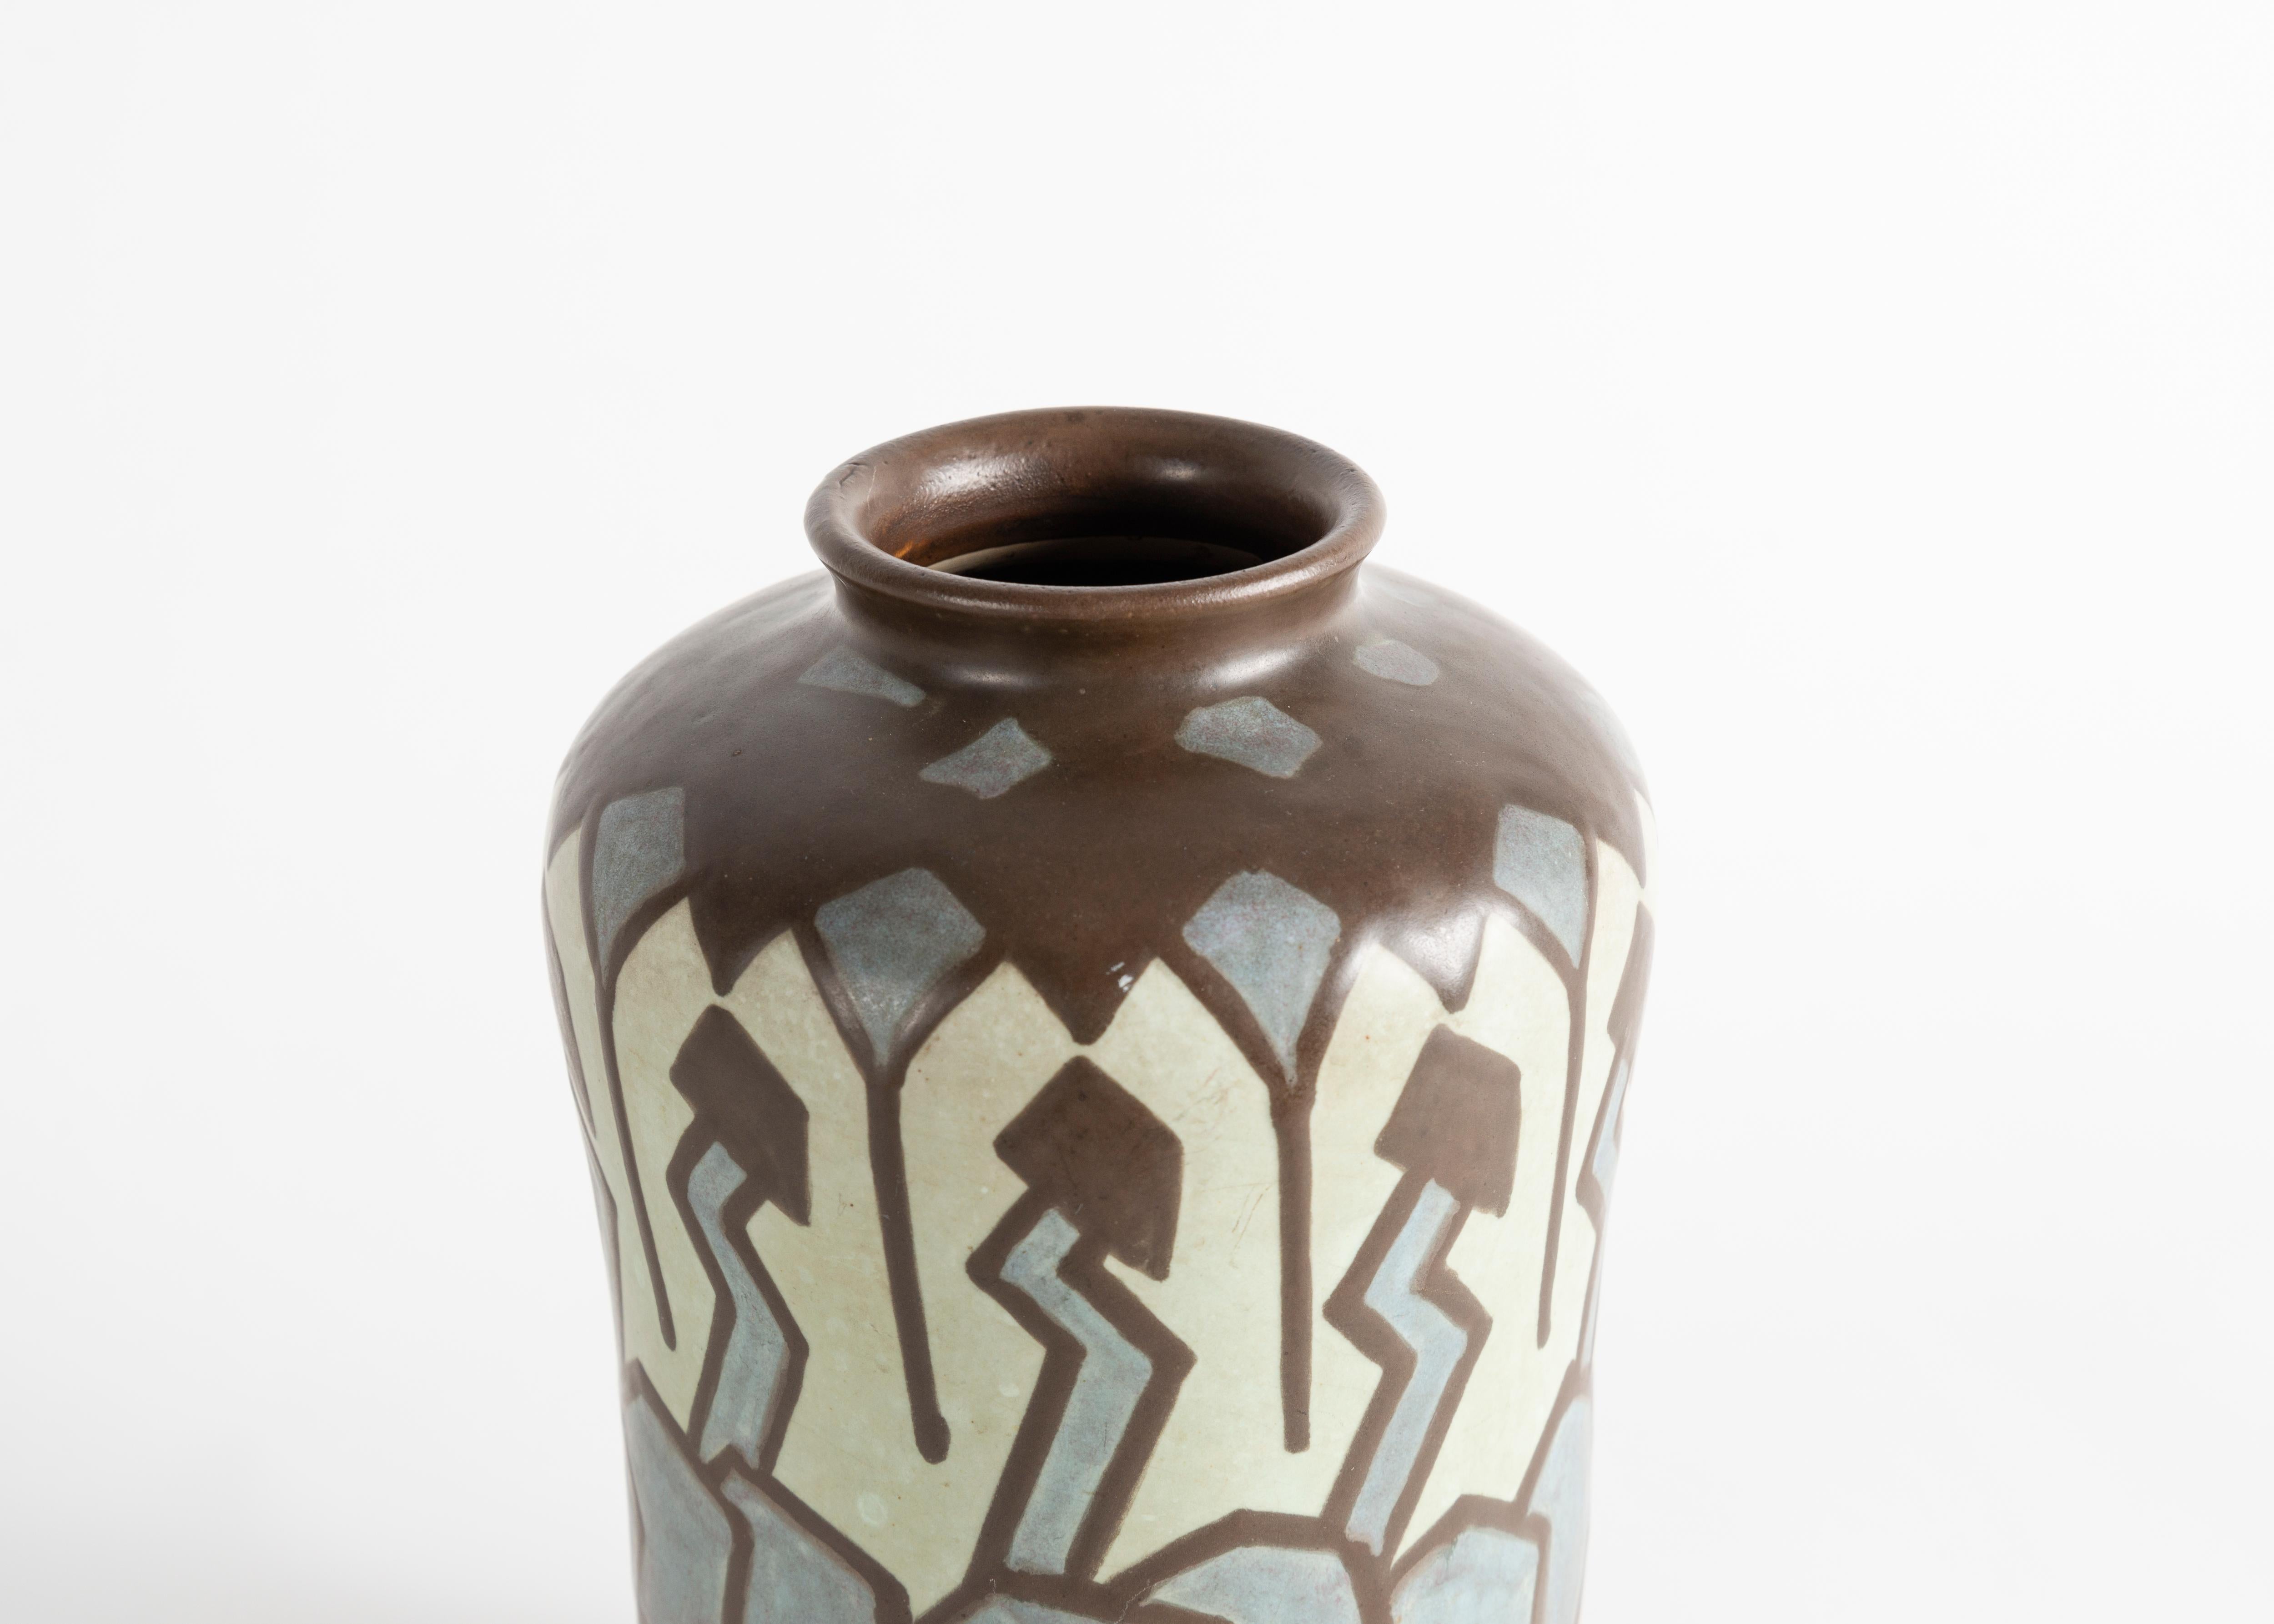 Art Deco stoneware vase by Villeroy & Boch. Luxembourg, circa 1930.

Signed: V&B
Numbered: 313 & 1535.